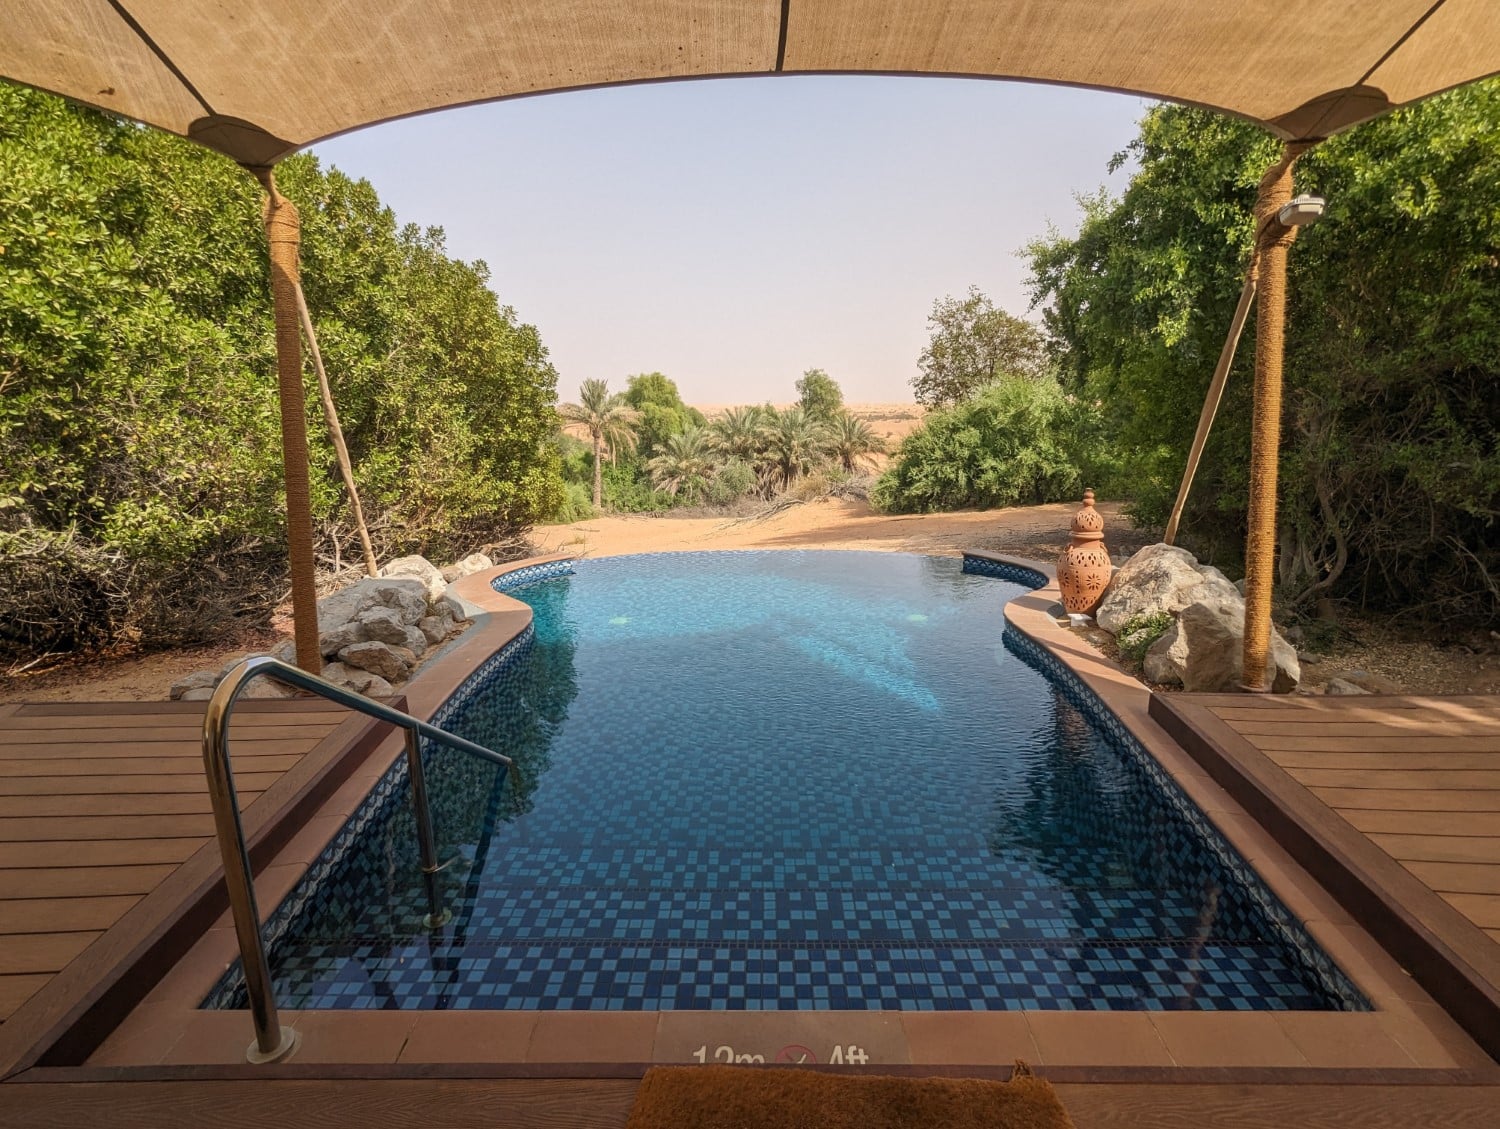 View overlooking the desert and private plunge pool from the Bedouin suite at Al Maha resort.